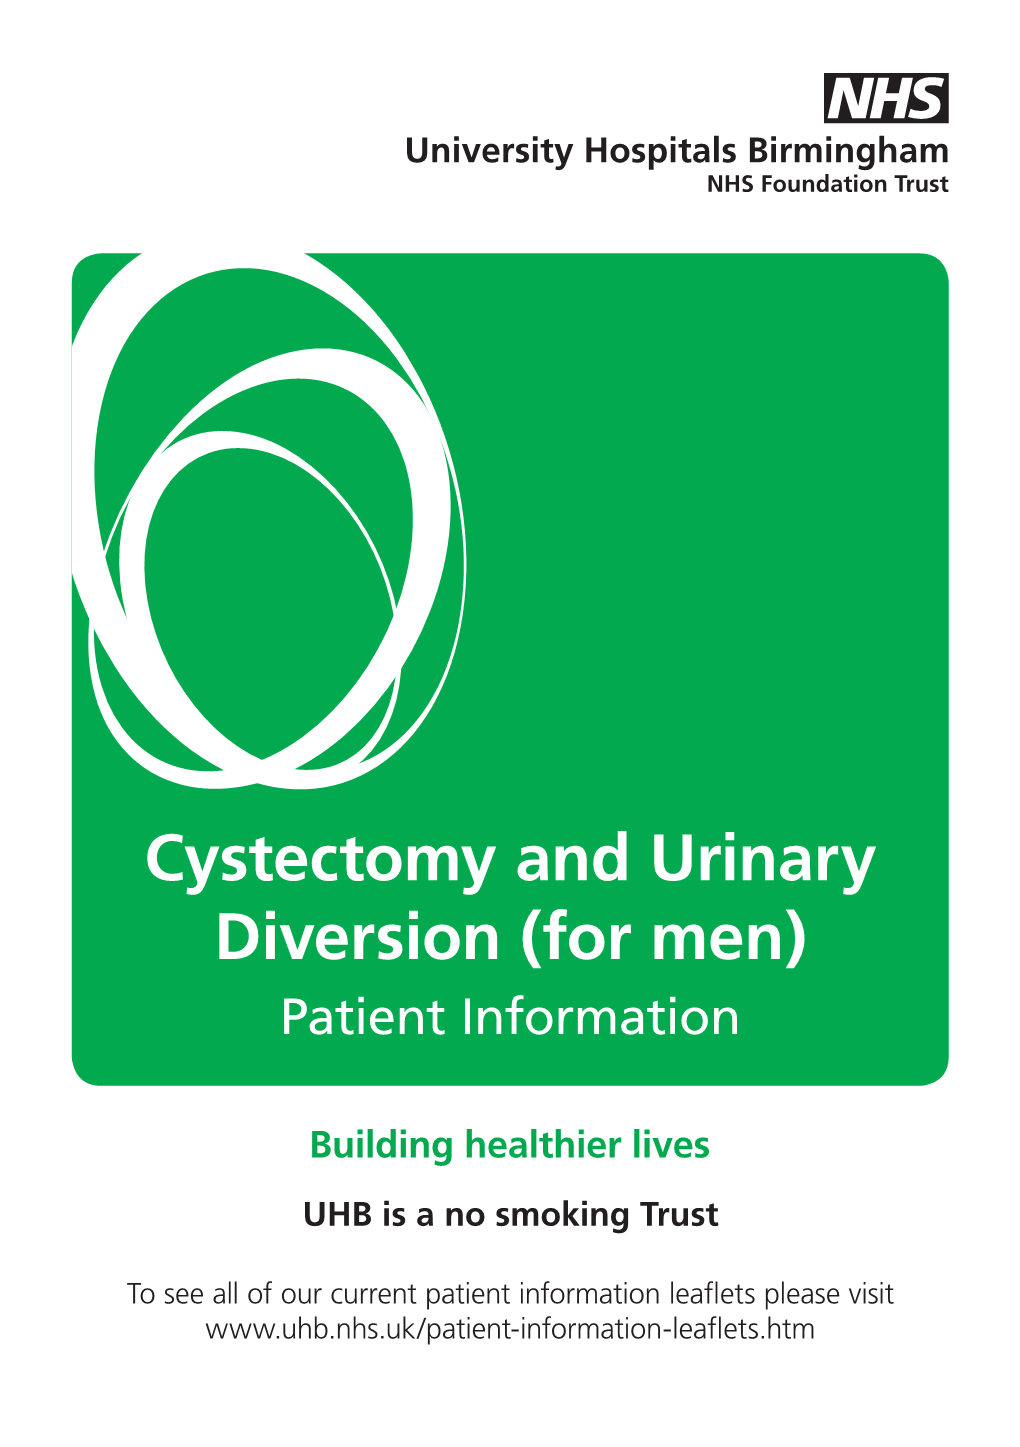 Cystectomy and Urinary Diversion (For Men) Patient Information